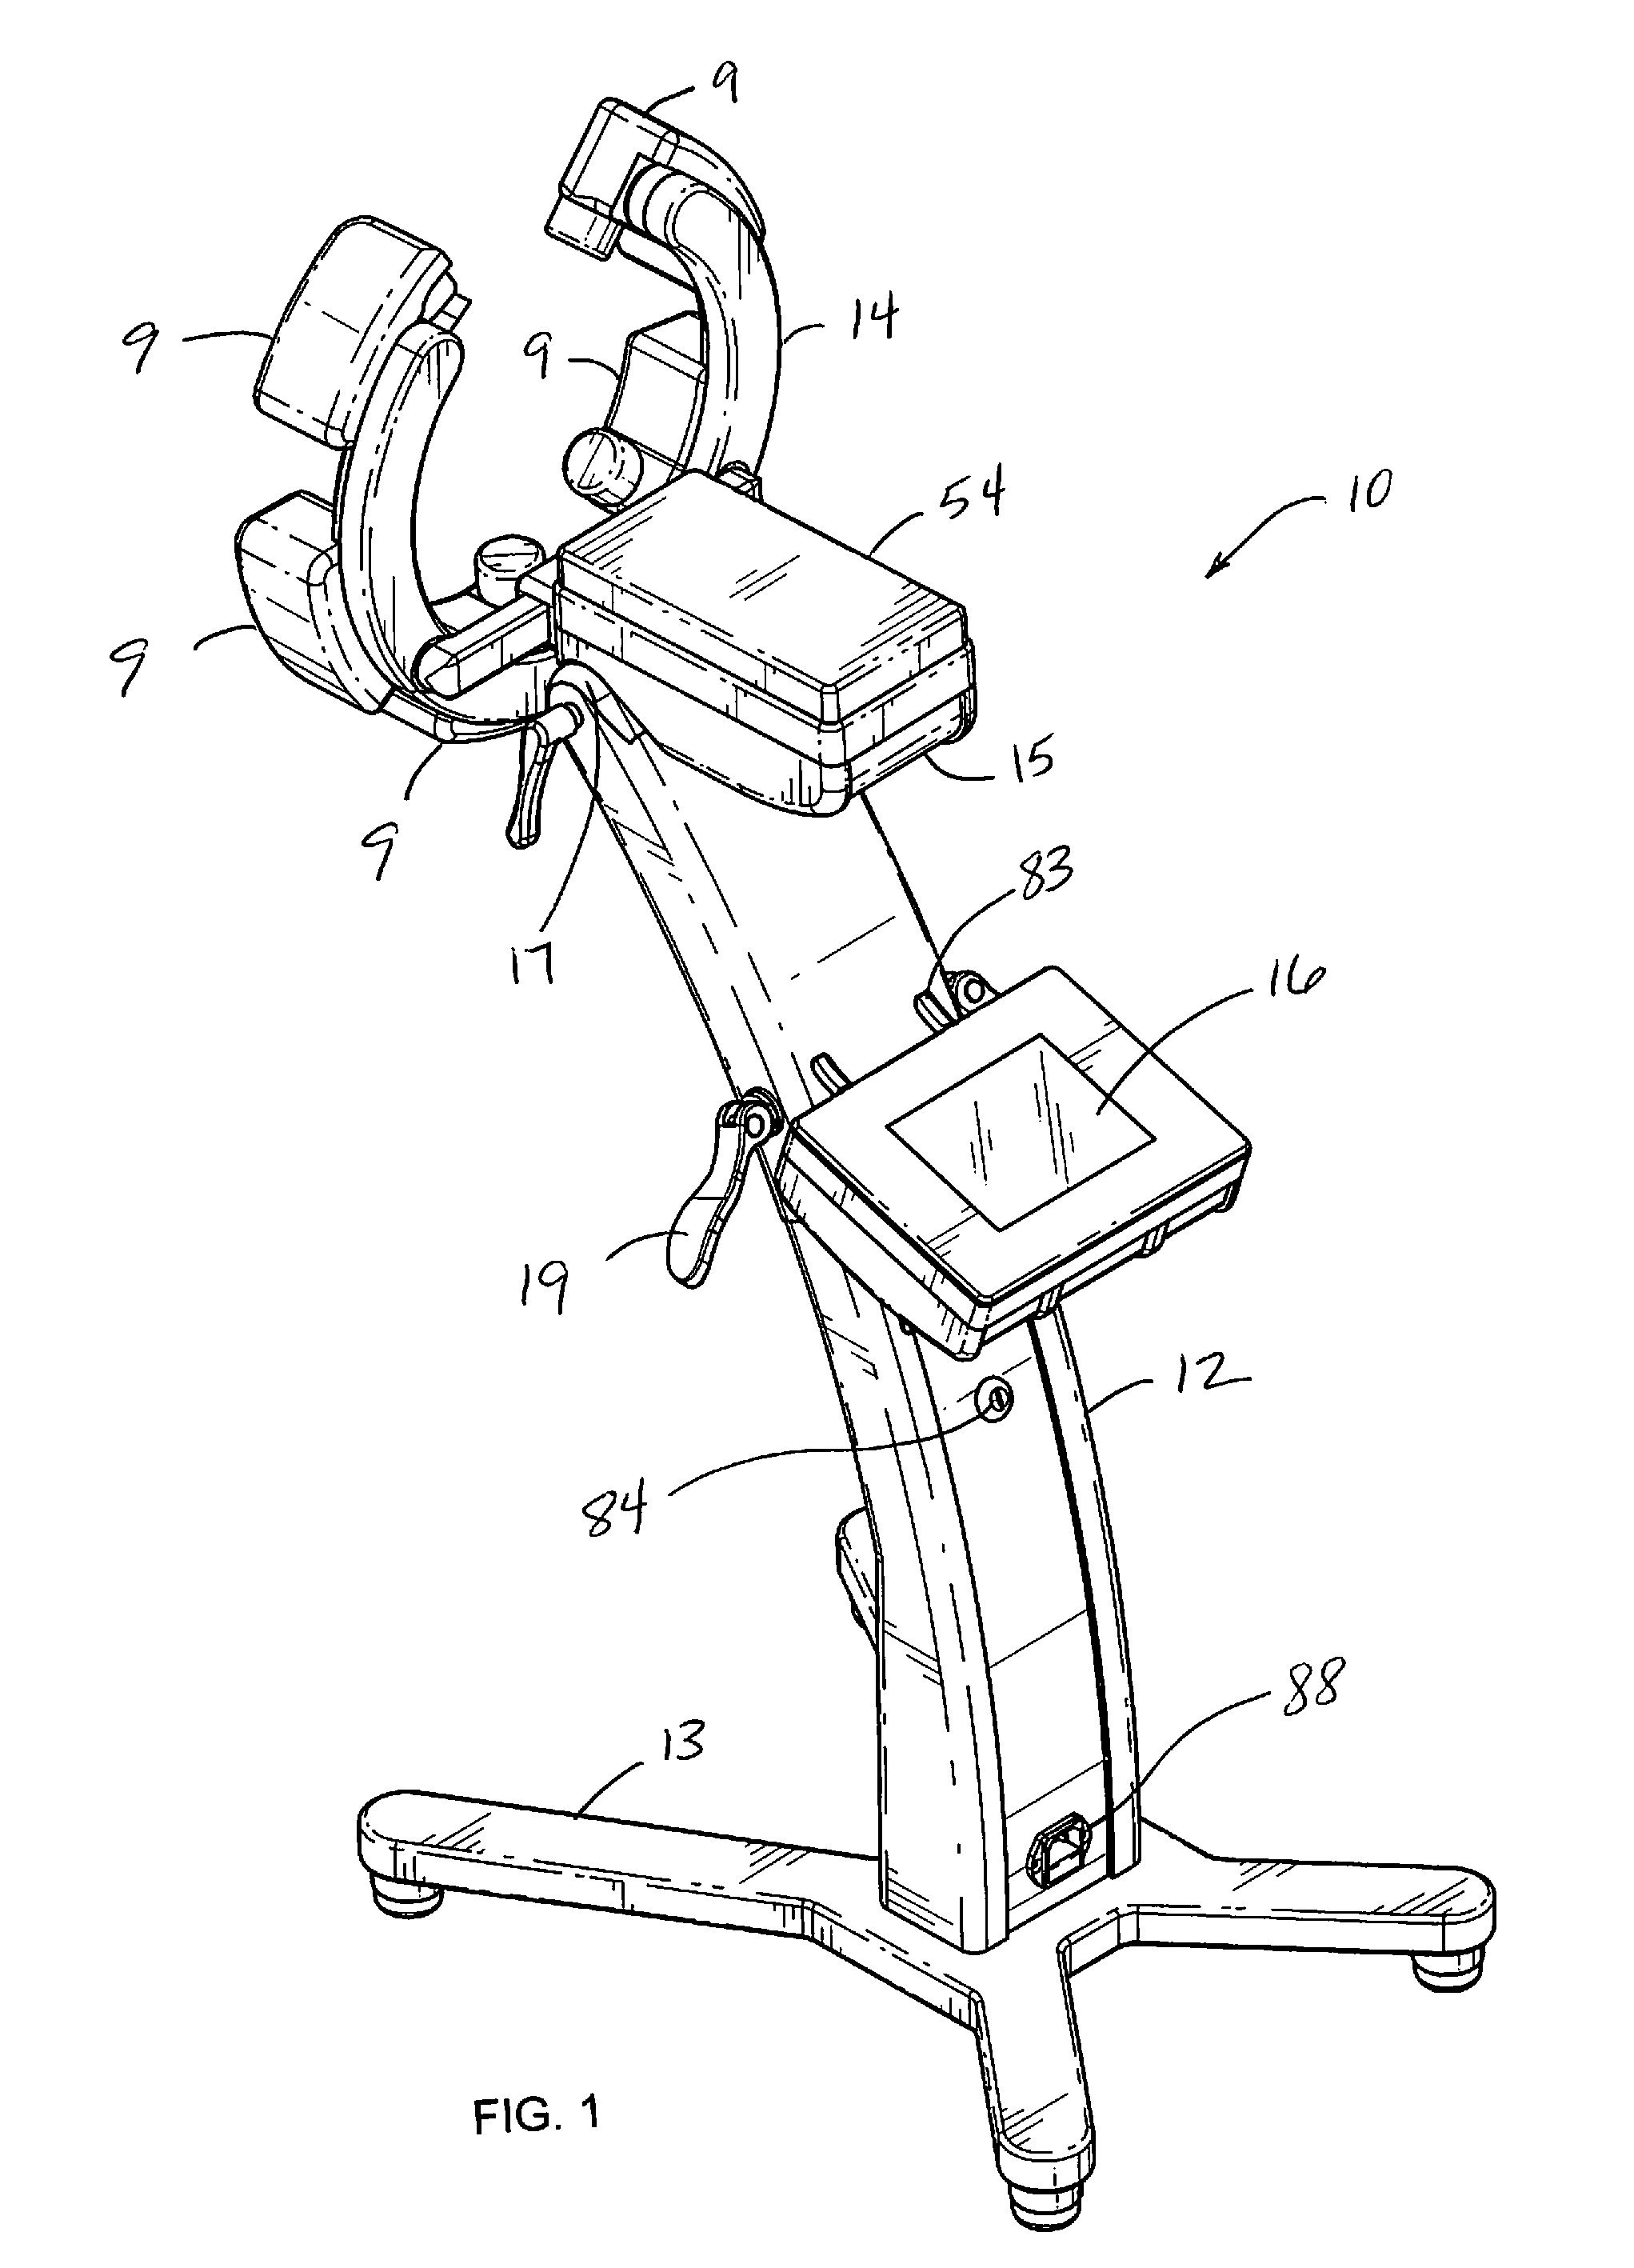 Low level laser therapy device with open bore